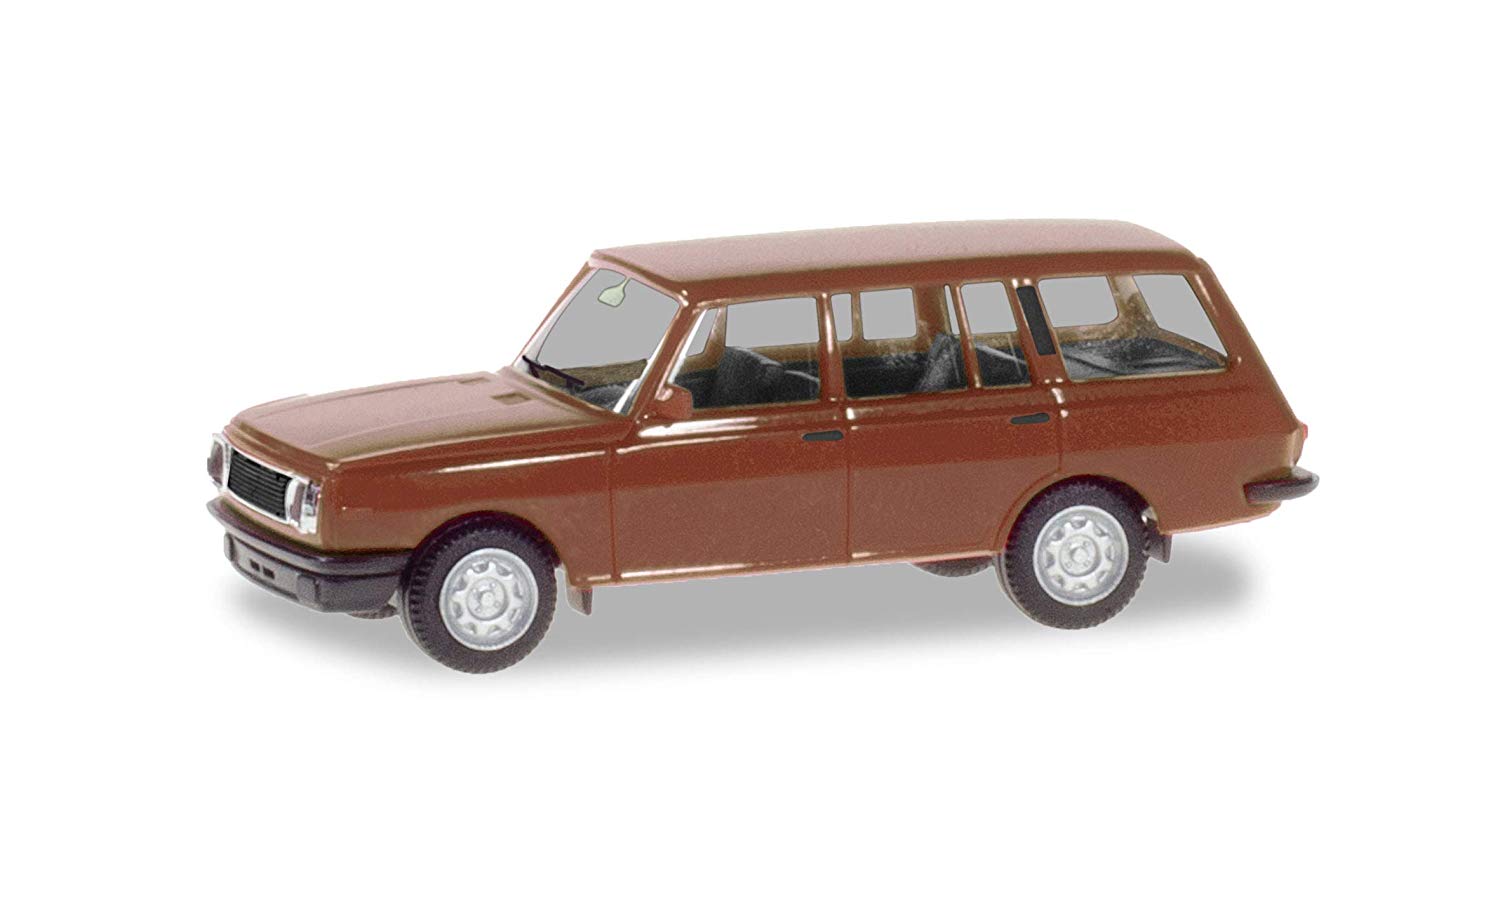 Herpa Miniaturmodelle GmbH Herpa 420402 Wartburg 353 Tourist Car for Crafts and Collecting Copper Brow